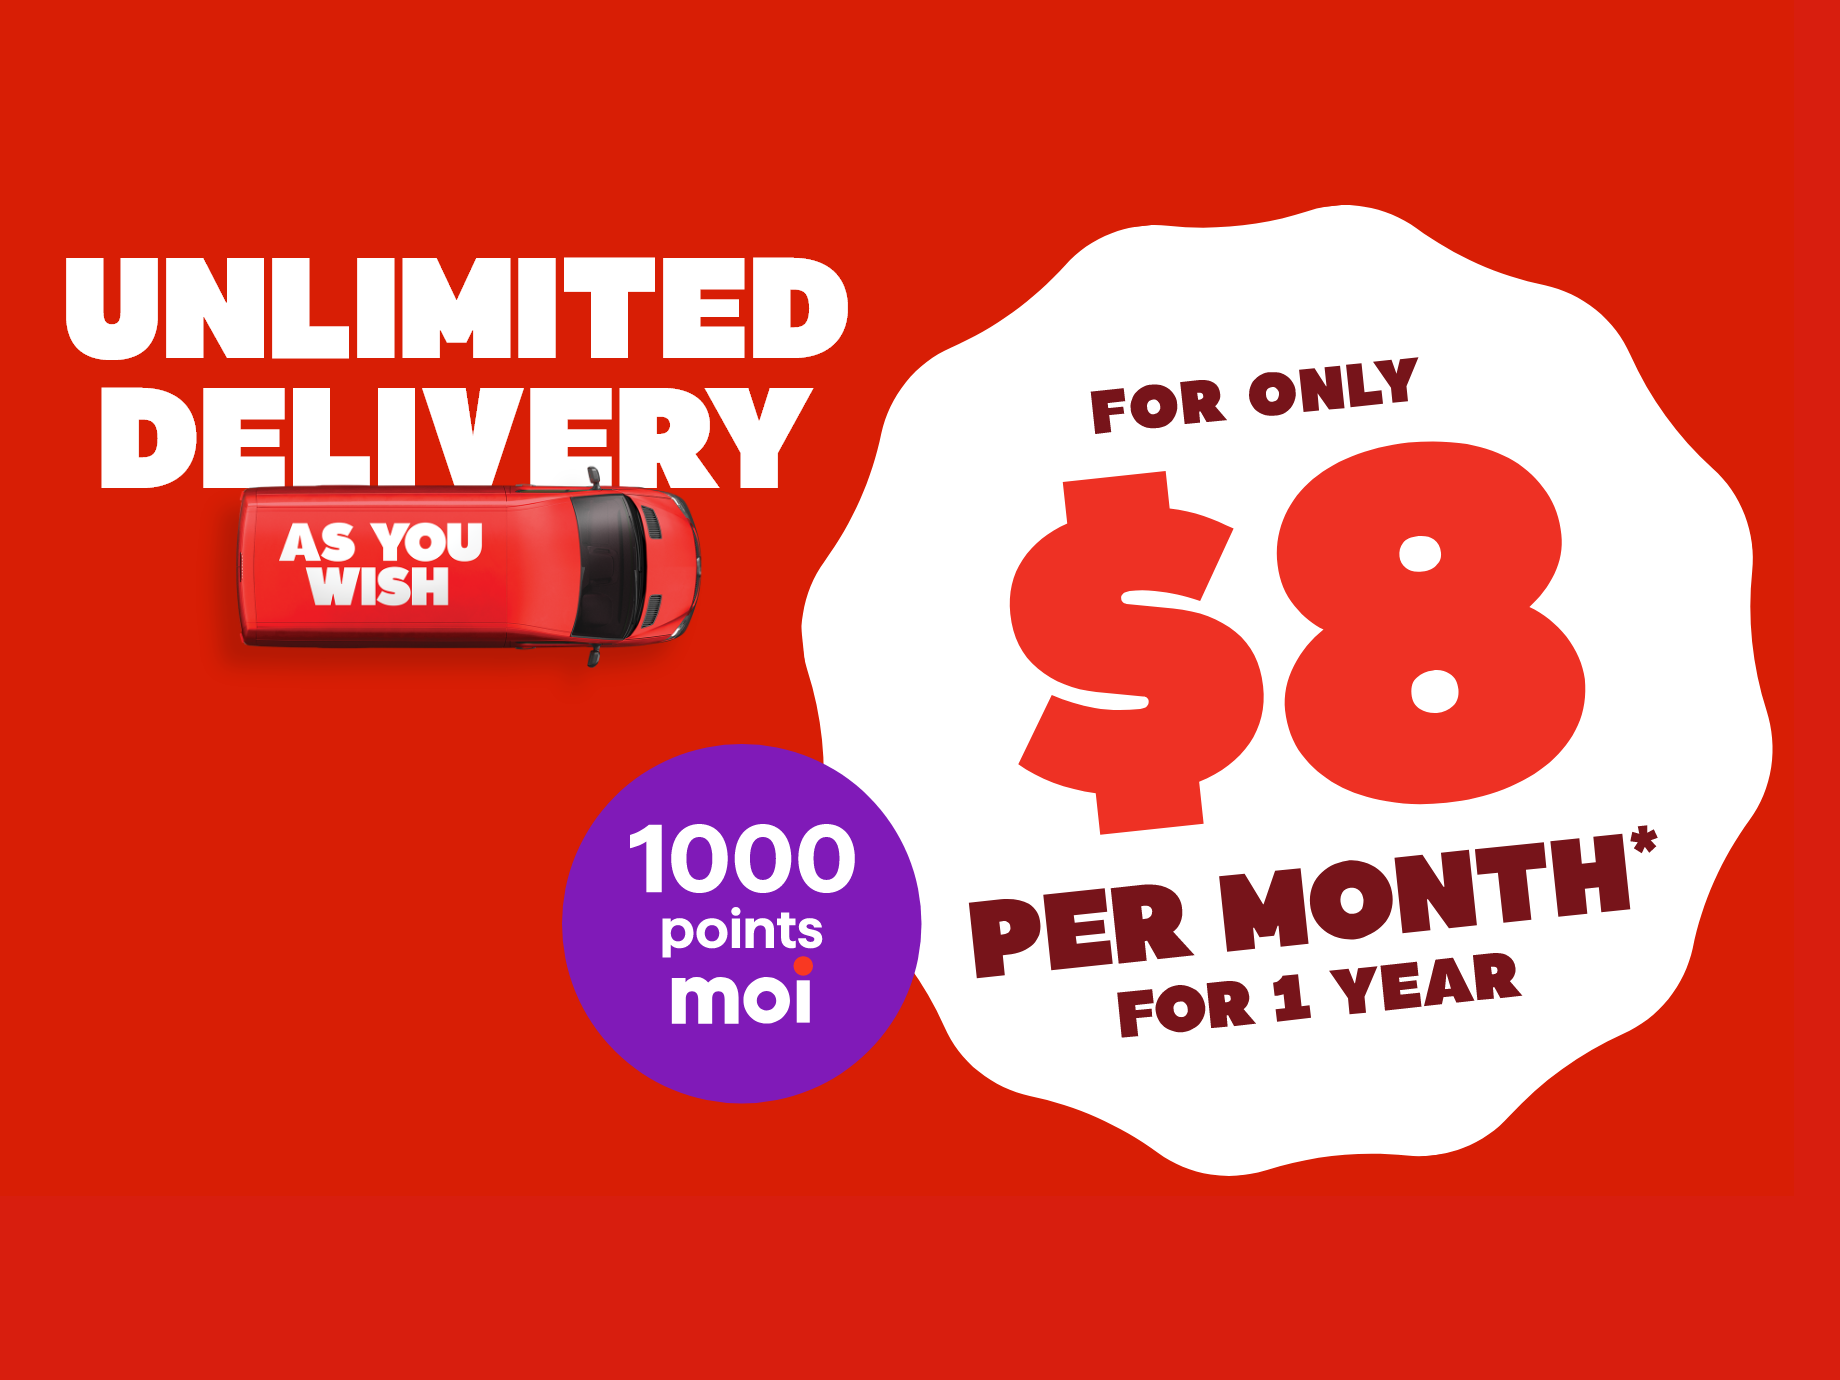 Unlimited Delivery for only $8 per month for 1 year*!